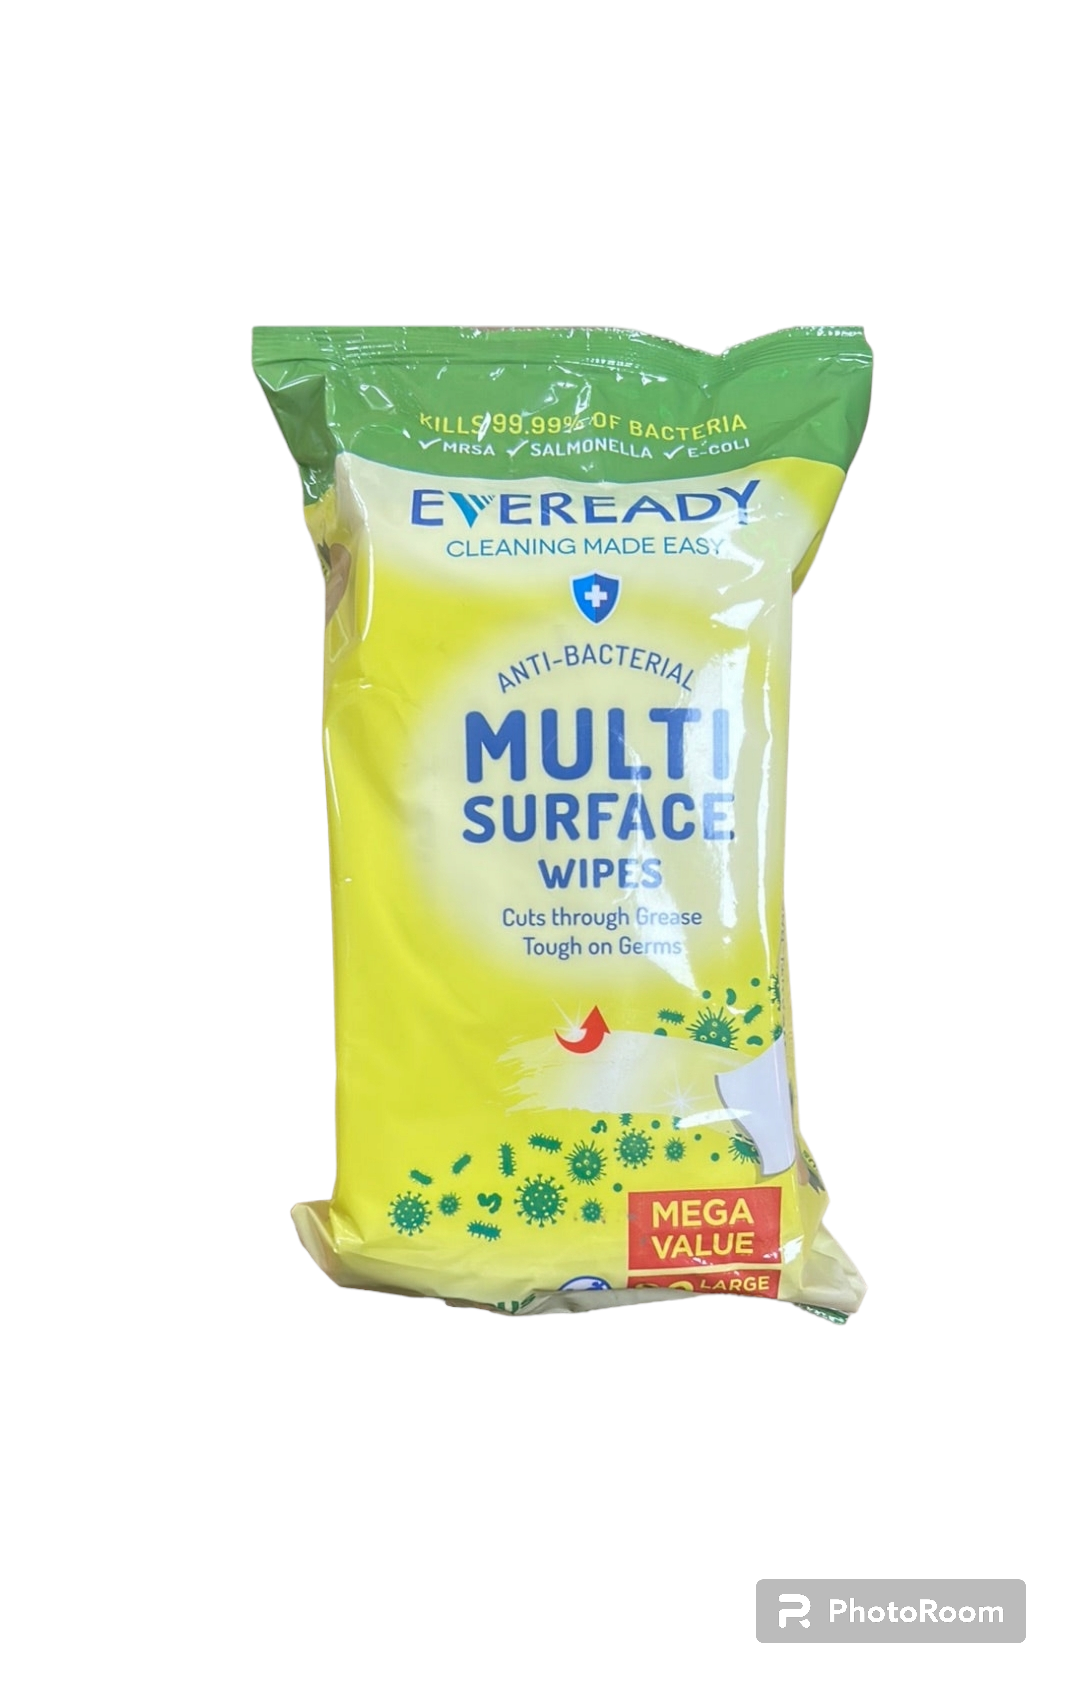 Everyday multi surface wipes